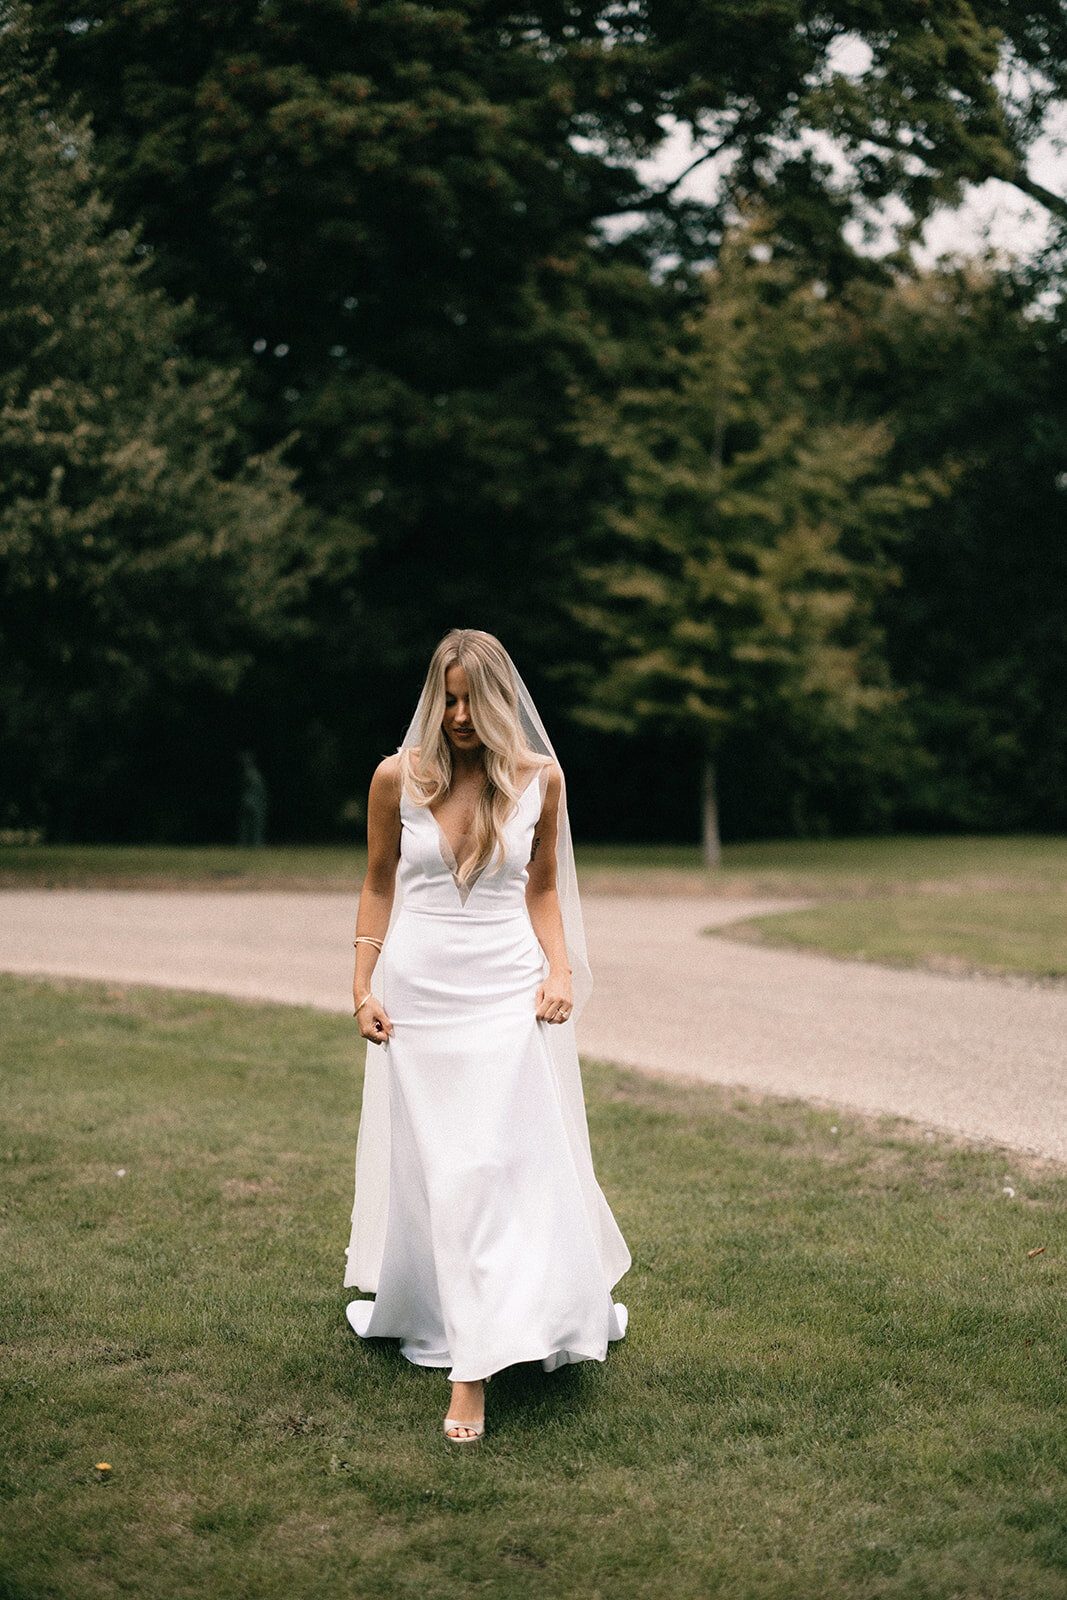 Attabara Studio UK Luxury Wedding Planners Private Estate Marquee Wedding with Rebecca Rees1 Attabara Studio UK Luxury Wedding Planners Private Estate Marquee Wedding with Rebecca Rees51